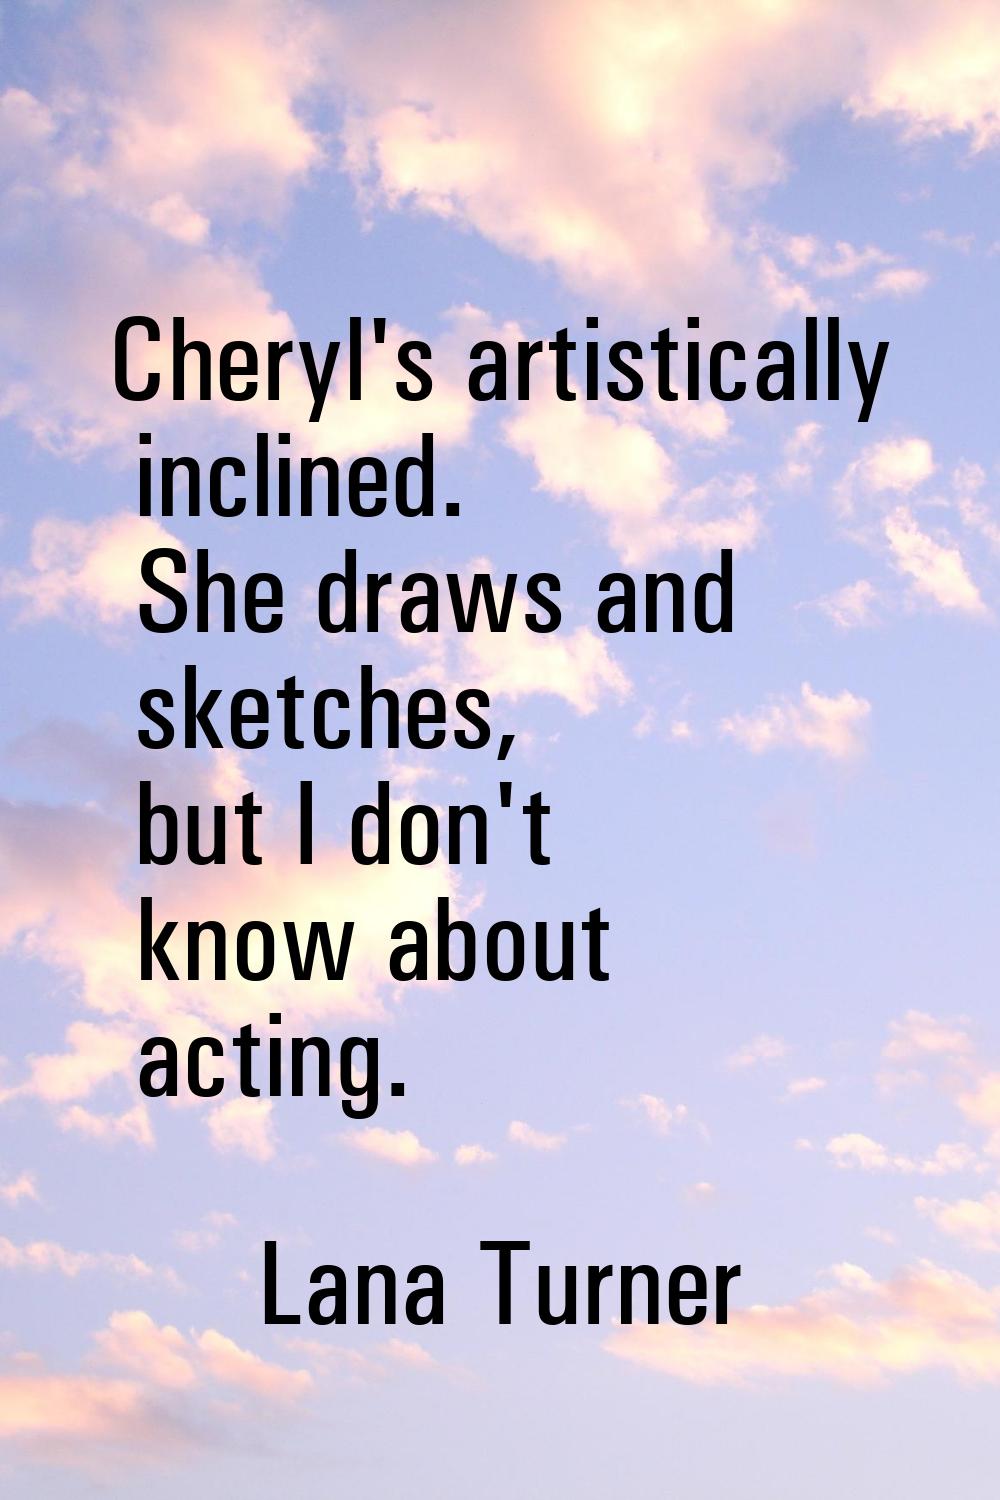 Cheryl's artistically inclined. She draws and sketches, but I don't know about acting.